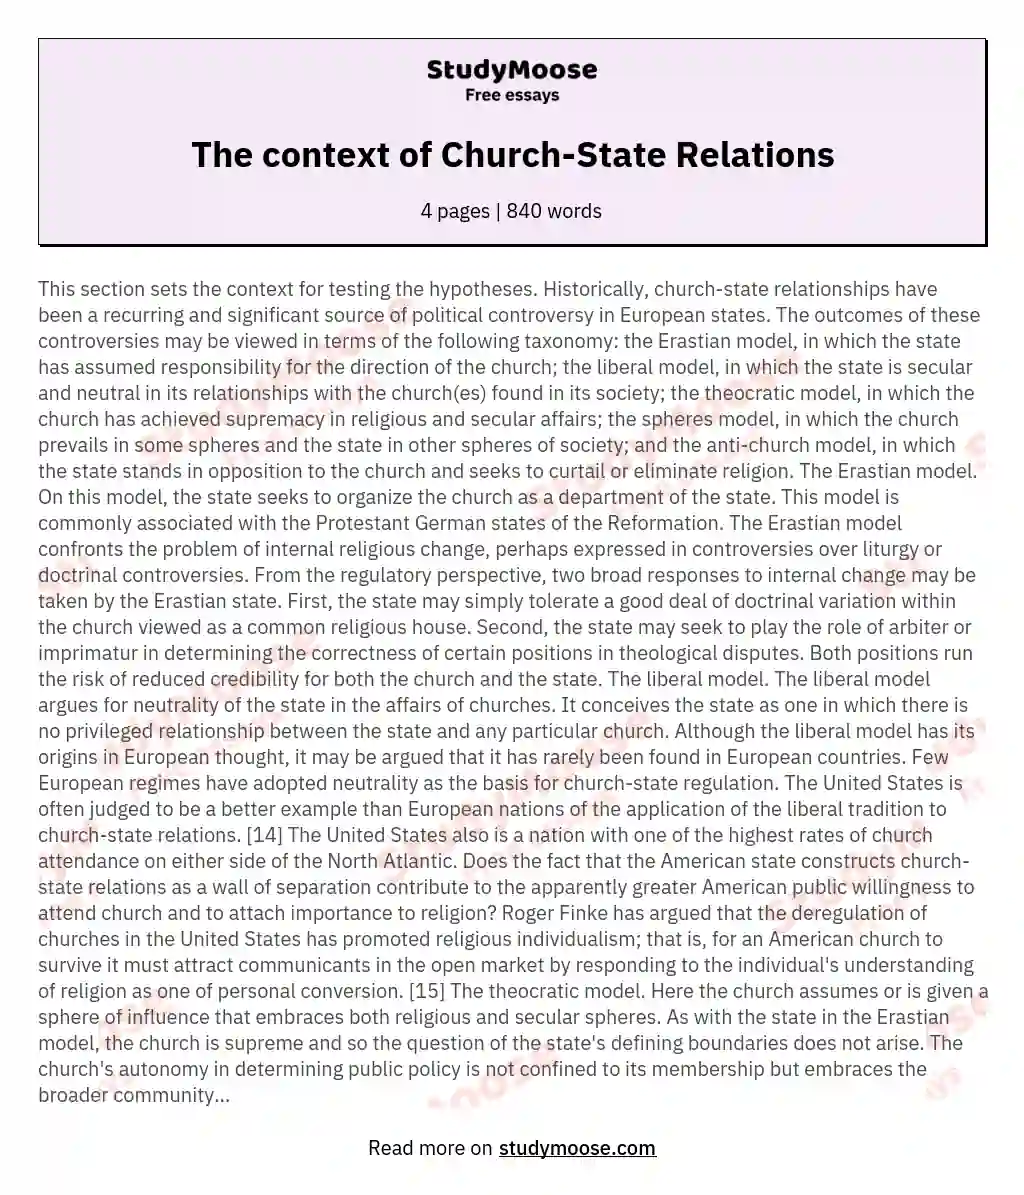 The context of Church-State Relations essay